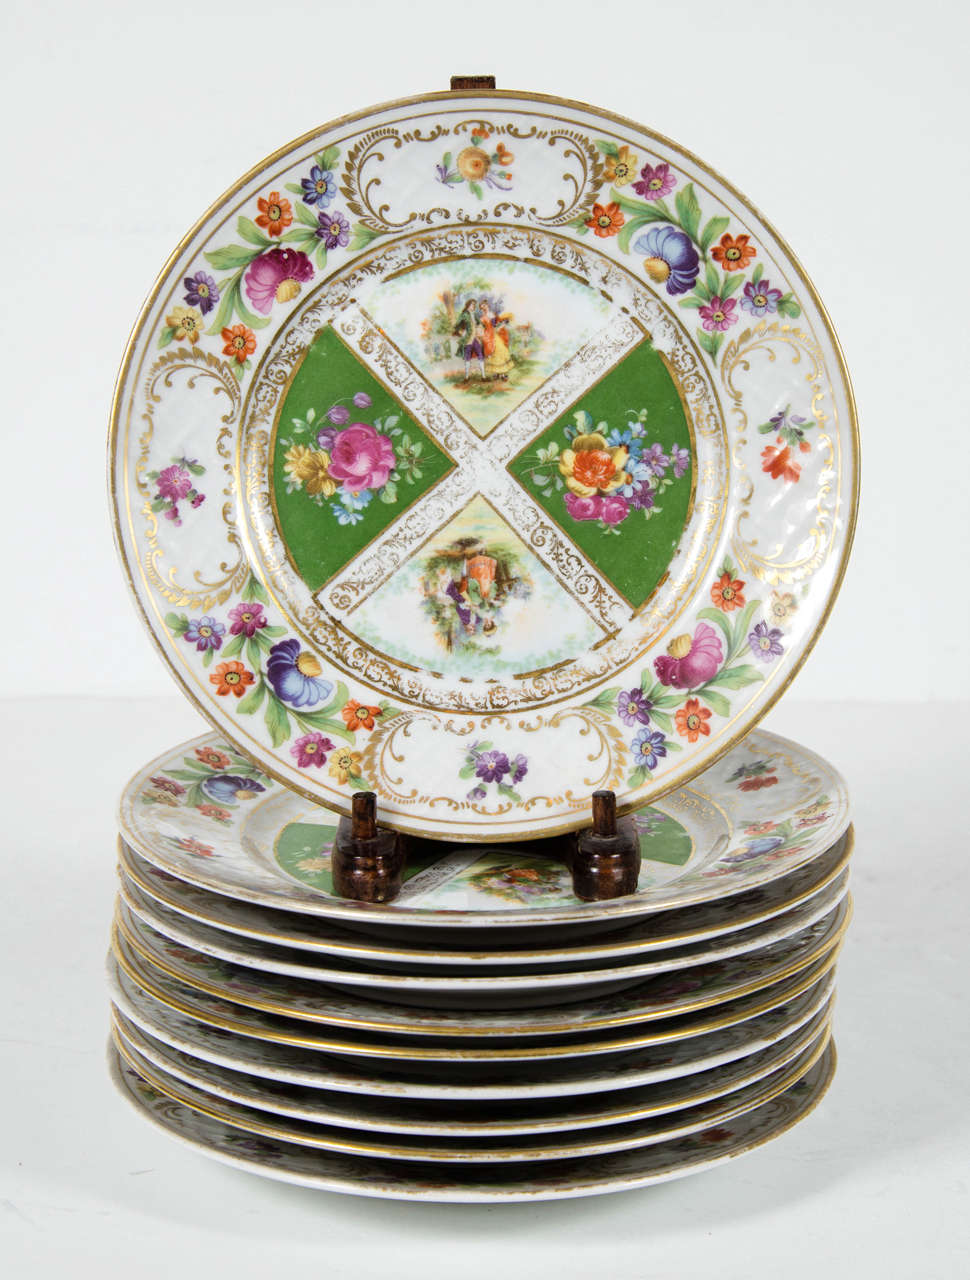 These porcelain desert plates are hand decorated with hand  painted foliage and colonial decoration embellished in 24k yellow gold.They are signed Schumann Dresden Art  Bavaria.They would mix in beautifully with modern to add an elegant and